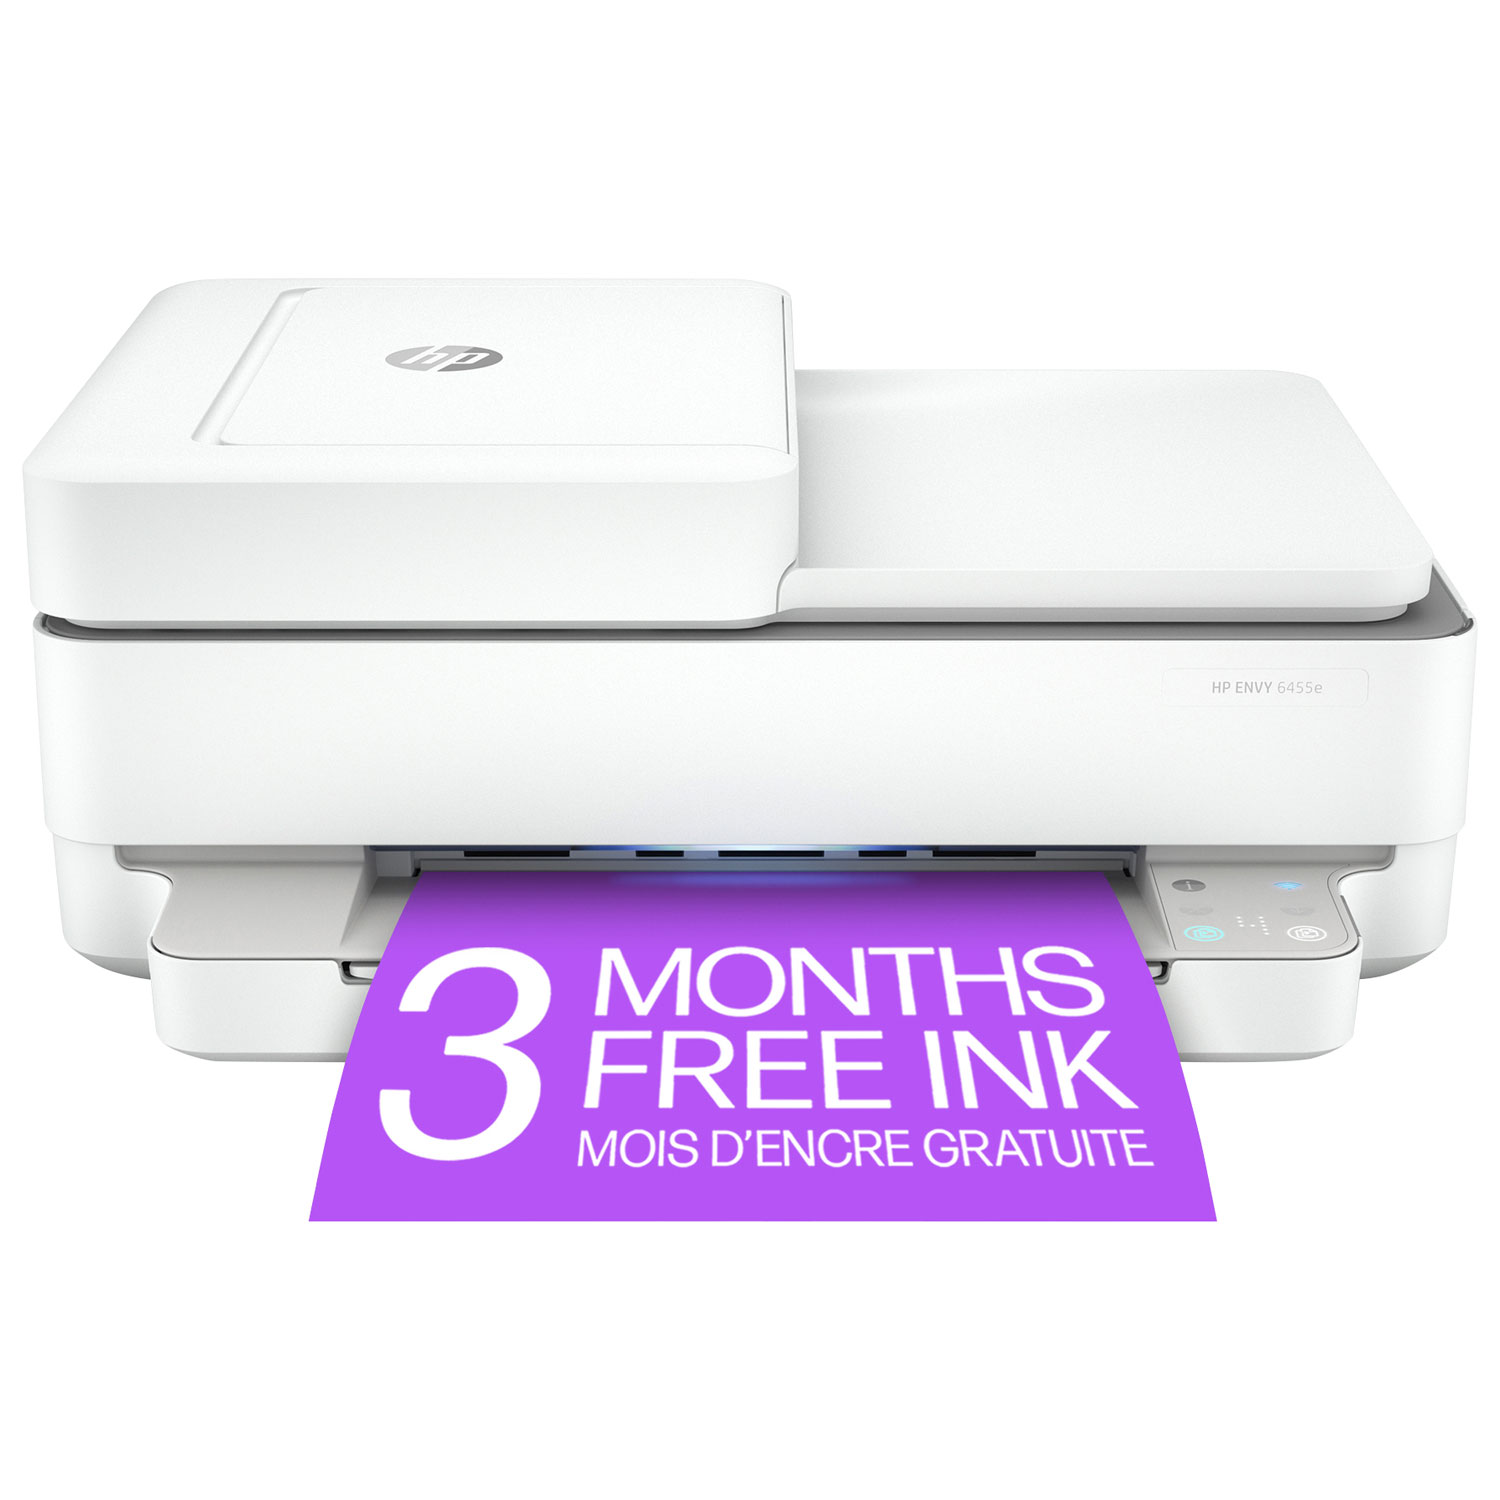 HP ENVY 6455e Wireless All-In-One Inkjet Printer - HP Instant Ink 3-Month Free Trial Included*